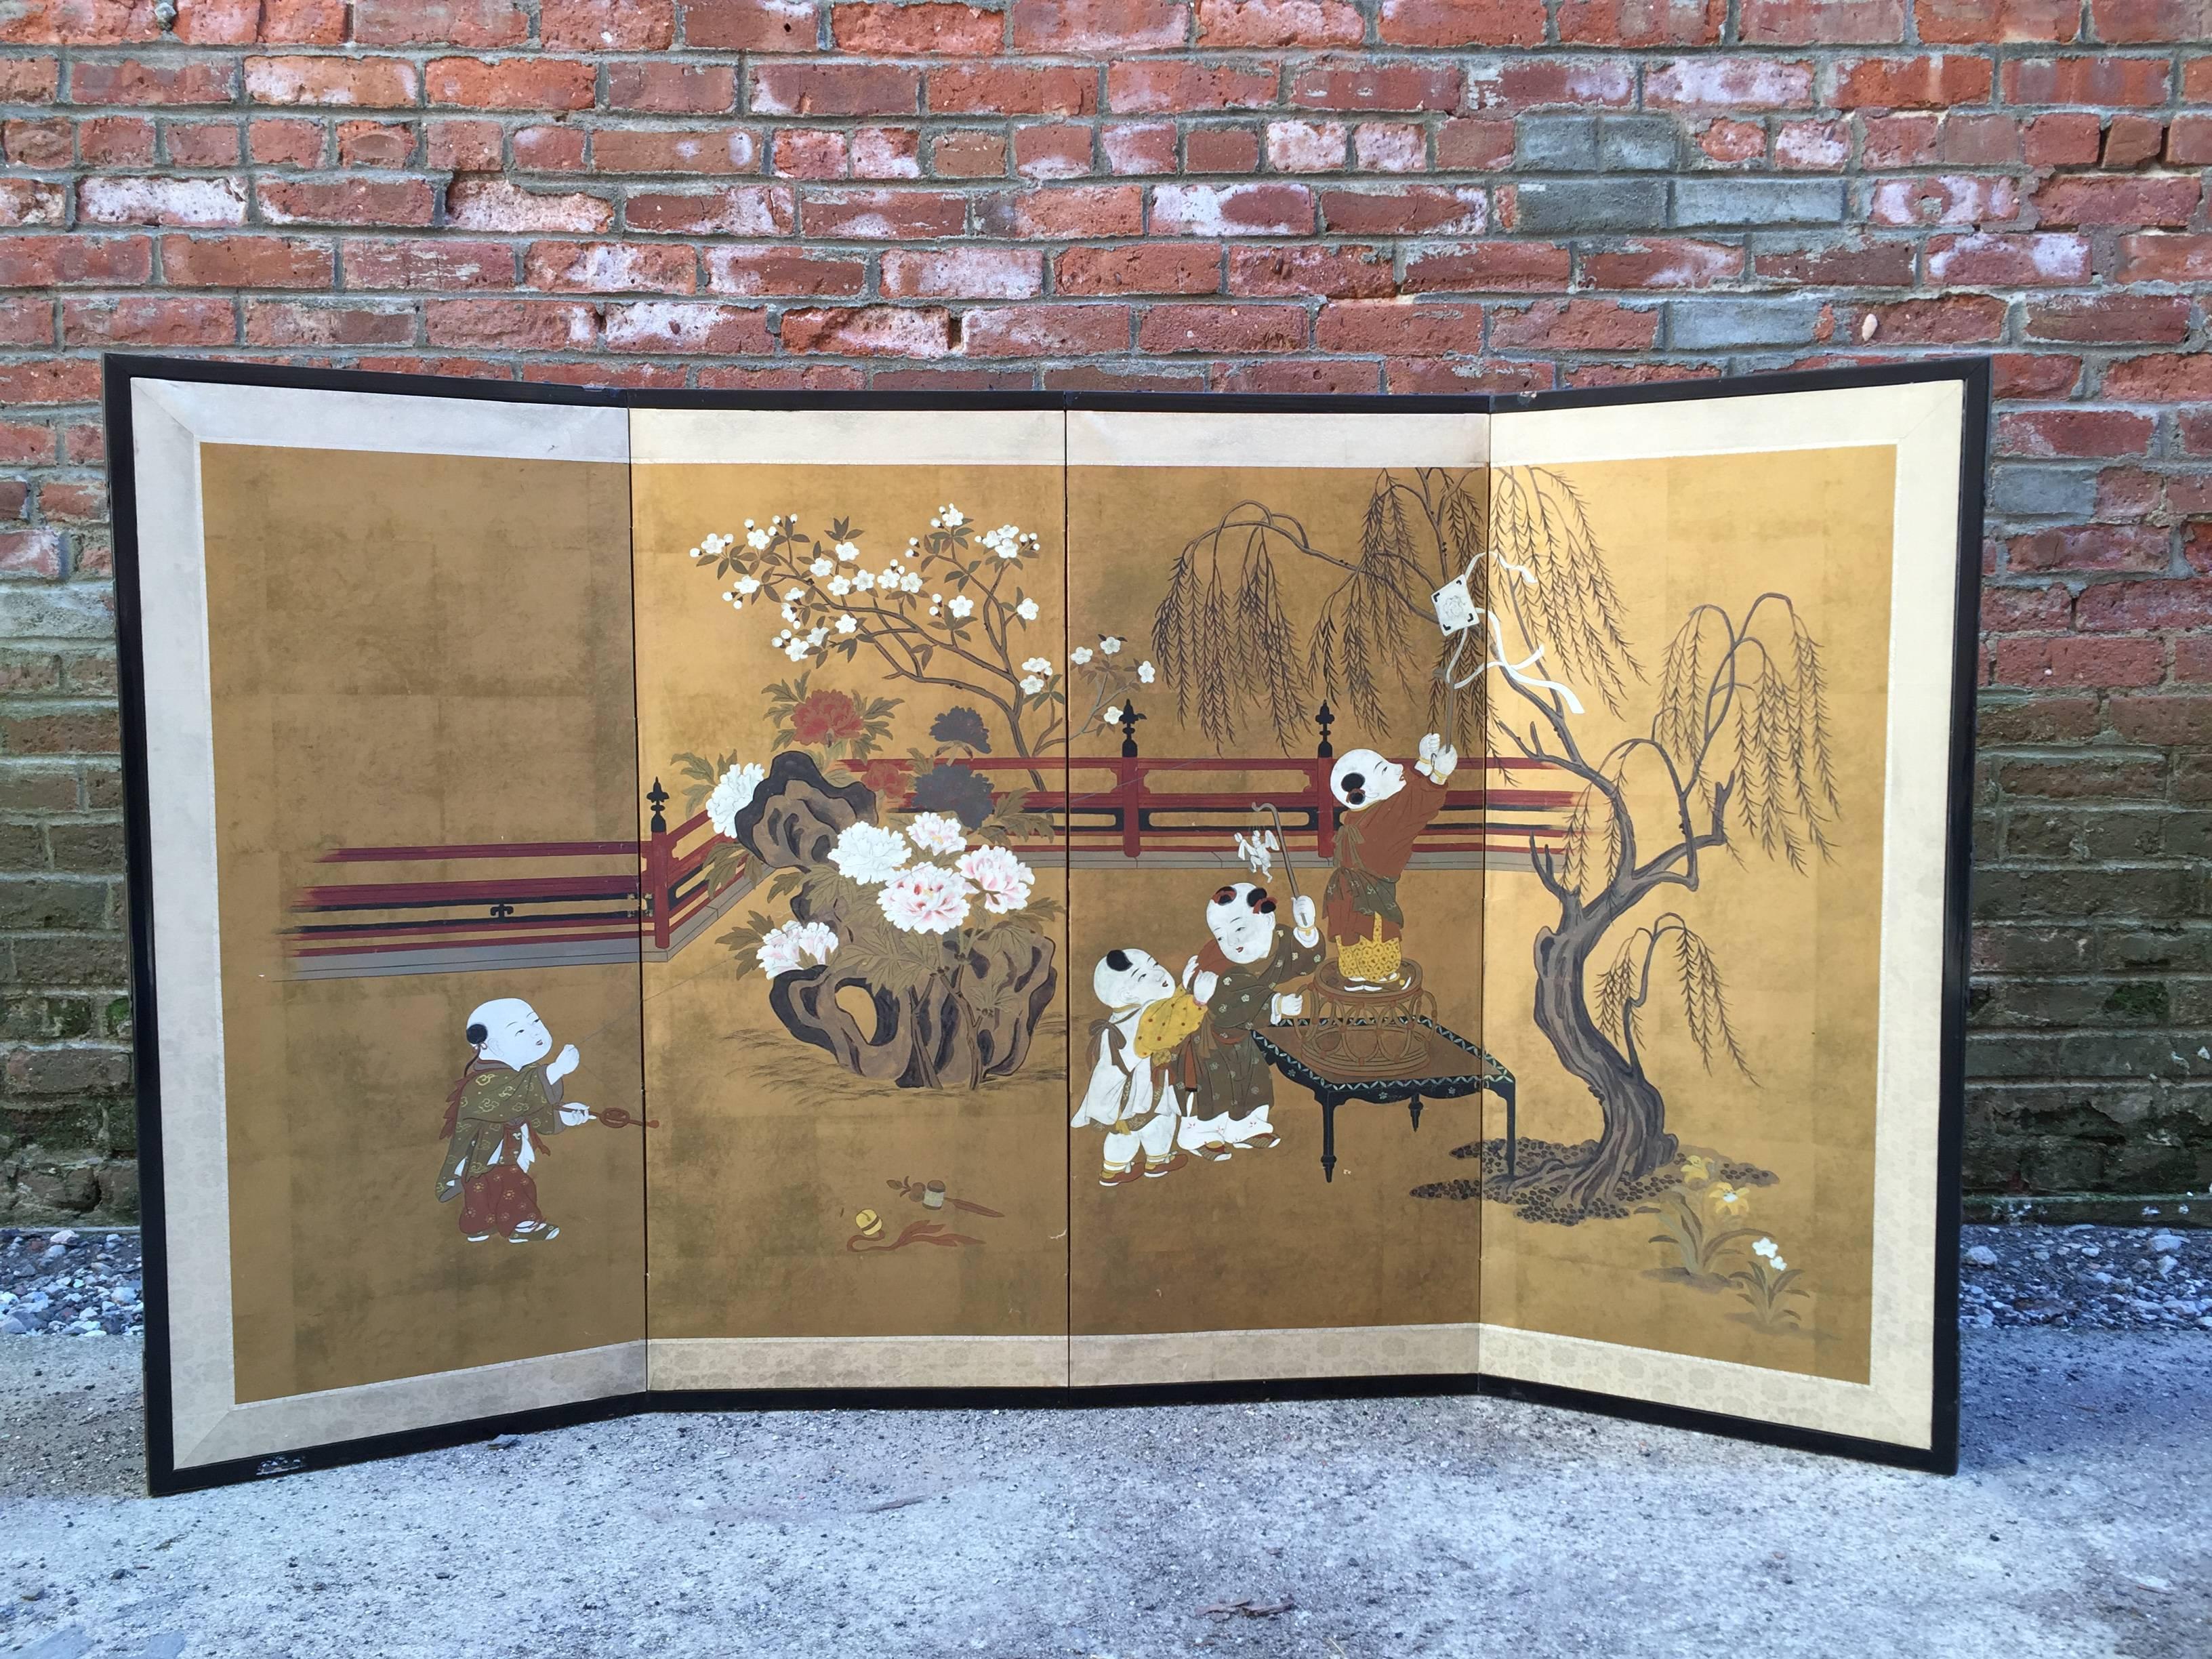 Intricately decorated Japanese folding screen. Hand-painted and gilded screen depicts four children at play; one is trying to fly a kite, one is retrieving the kite from a willow tree and two are in the process of playing keep away.

The